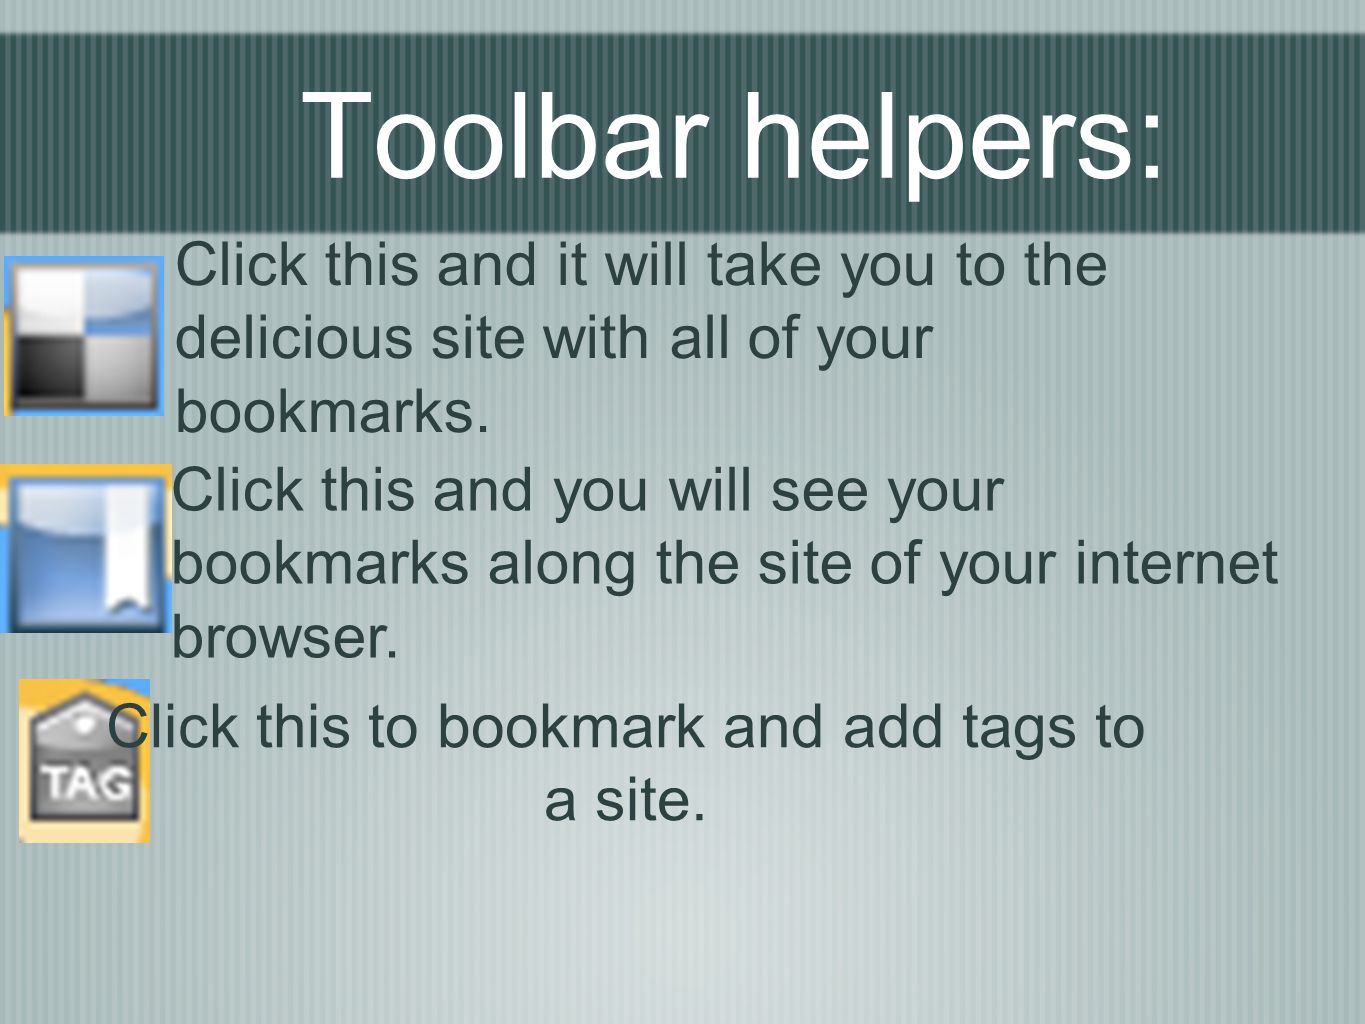 Toolbar helpers: Click this and you will see your bookmarks along the site of your internet browser.